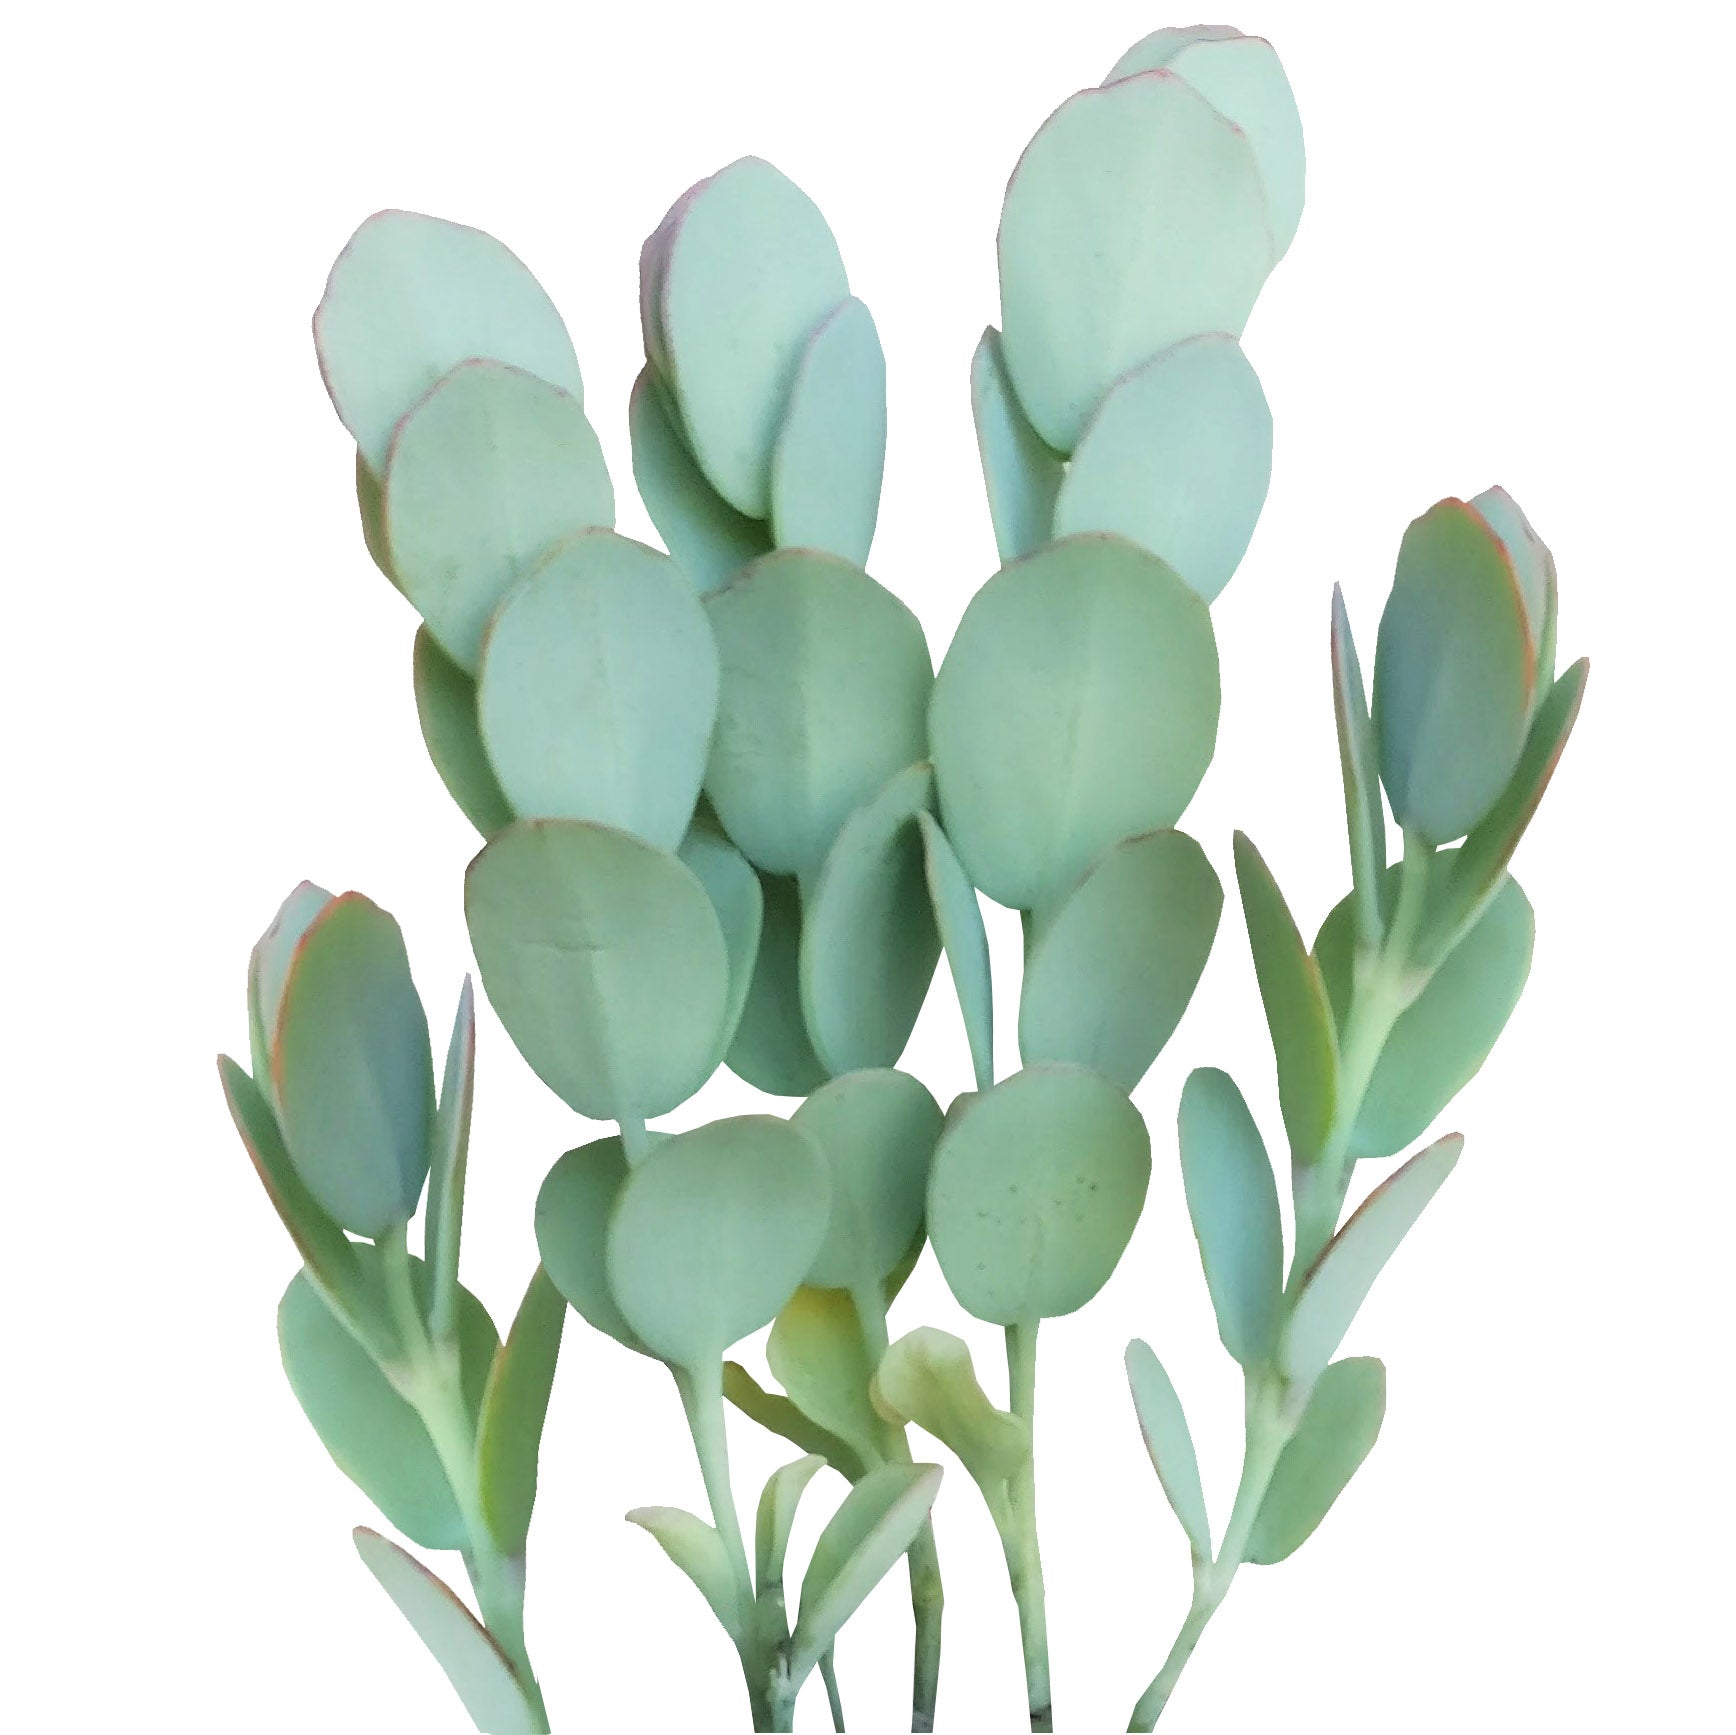 Kalanchoe Panamensis for sale, indoor succulents, succulents store in CA, succulents shop in California, Succulents, cactus, succulent care, succulent care tips, Succulents shop near me, Kalanchoe Panamensis in California, How to grow Kalanchoe Panamensis